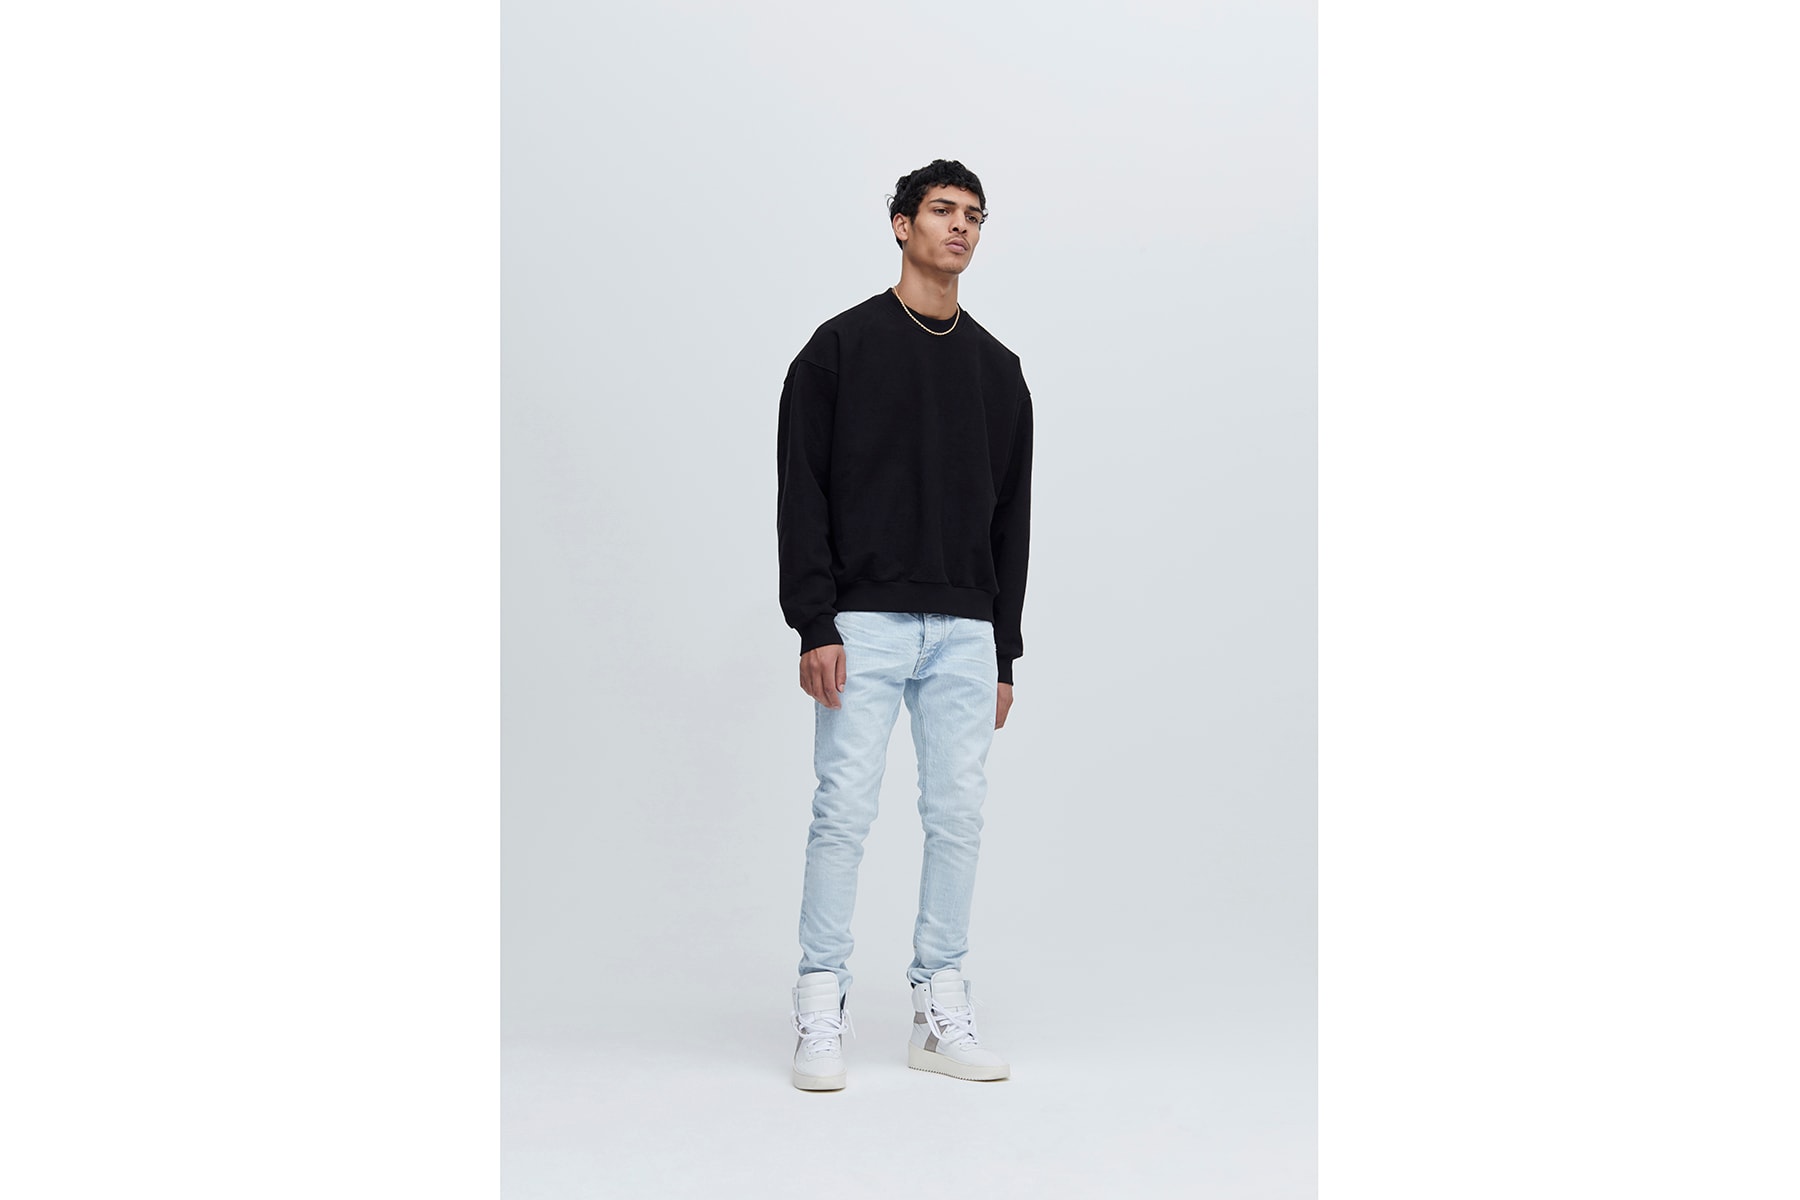 Fear of God Fifth Collection